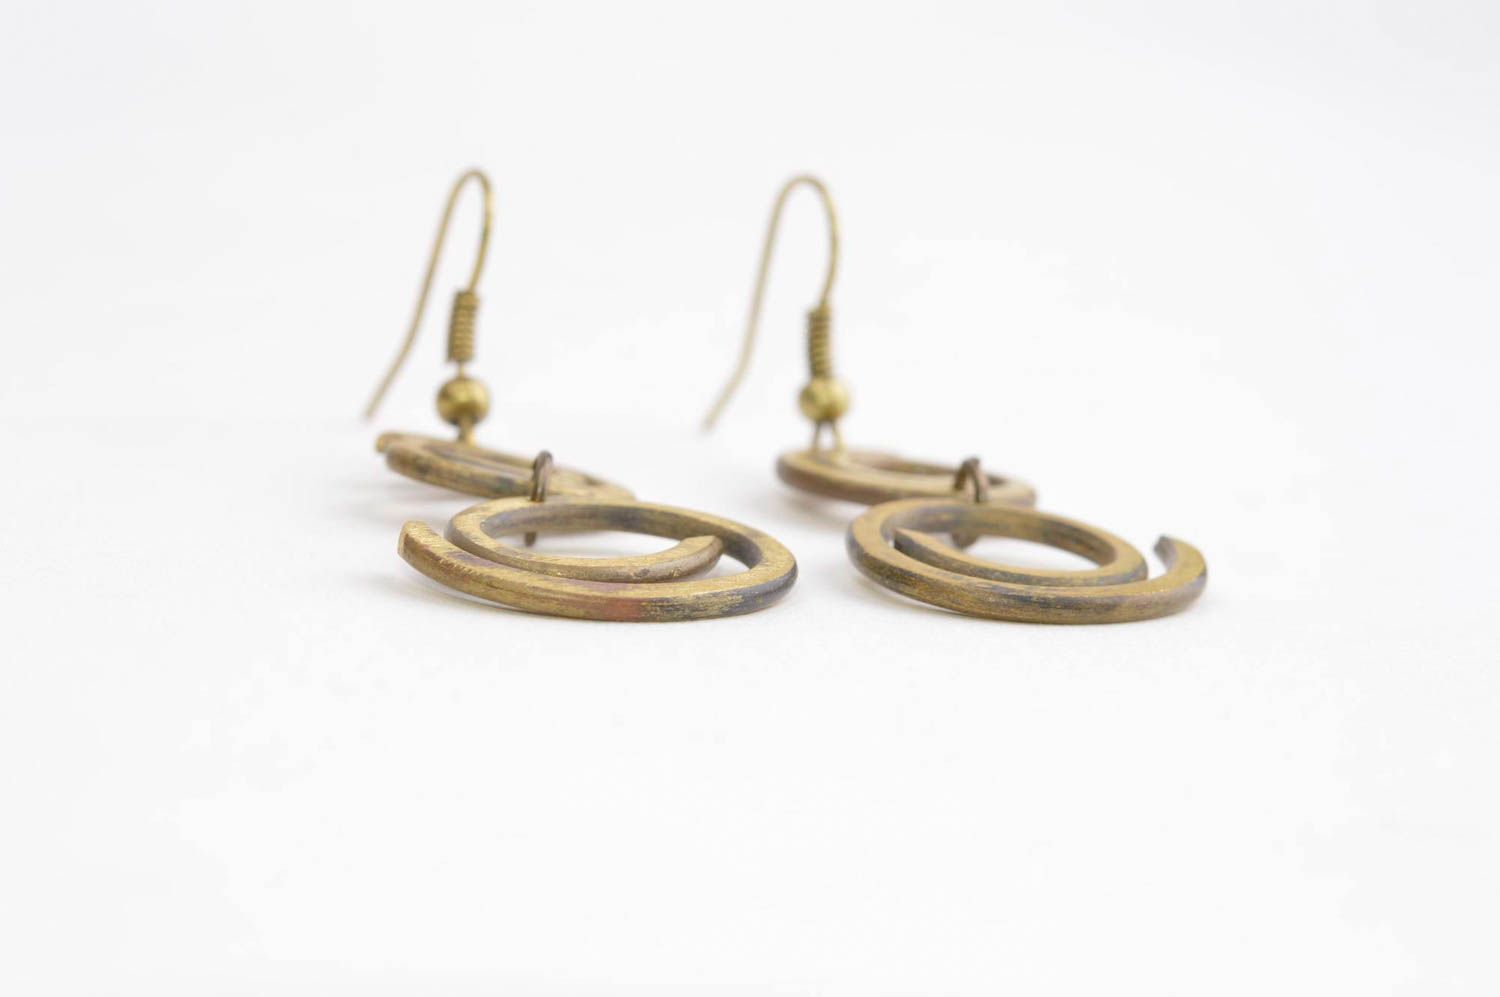 Unusual handmade metal earrings ideas costume jewelry designs gifts for her photo 3